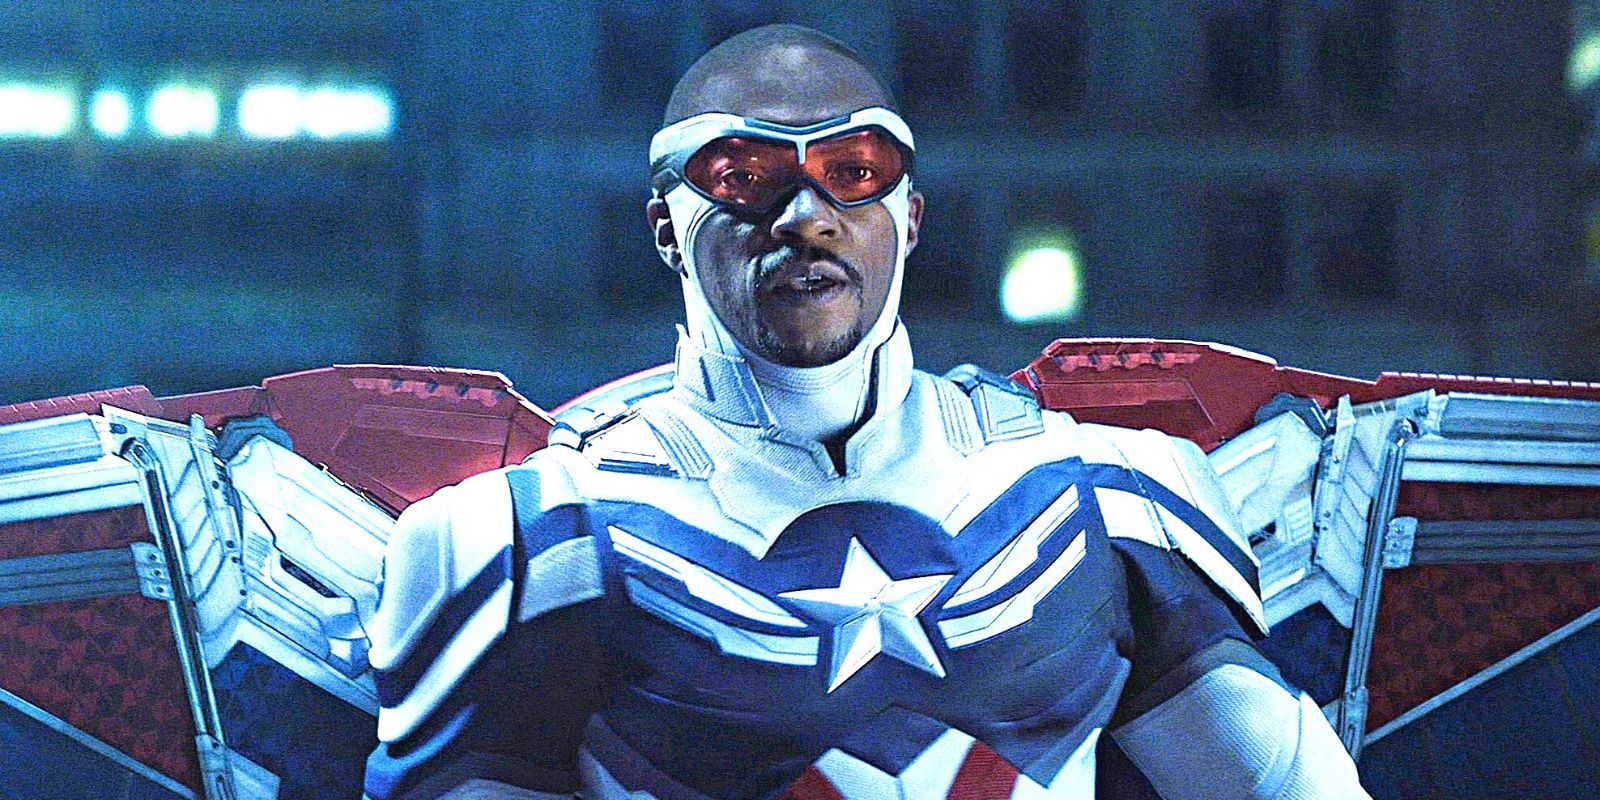 Sam Wilson (Anthony Mackie) as Captain America standing aghast, his wings spread